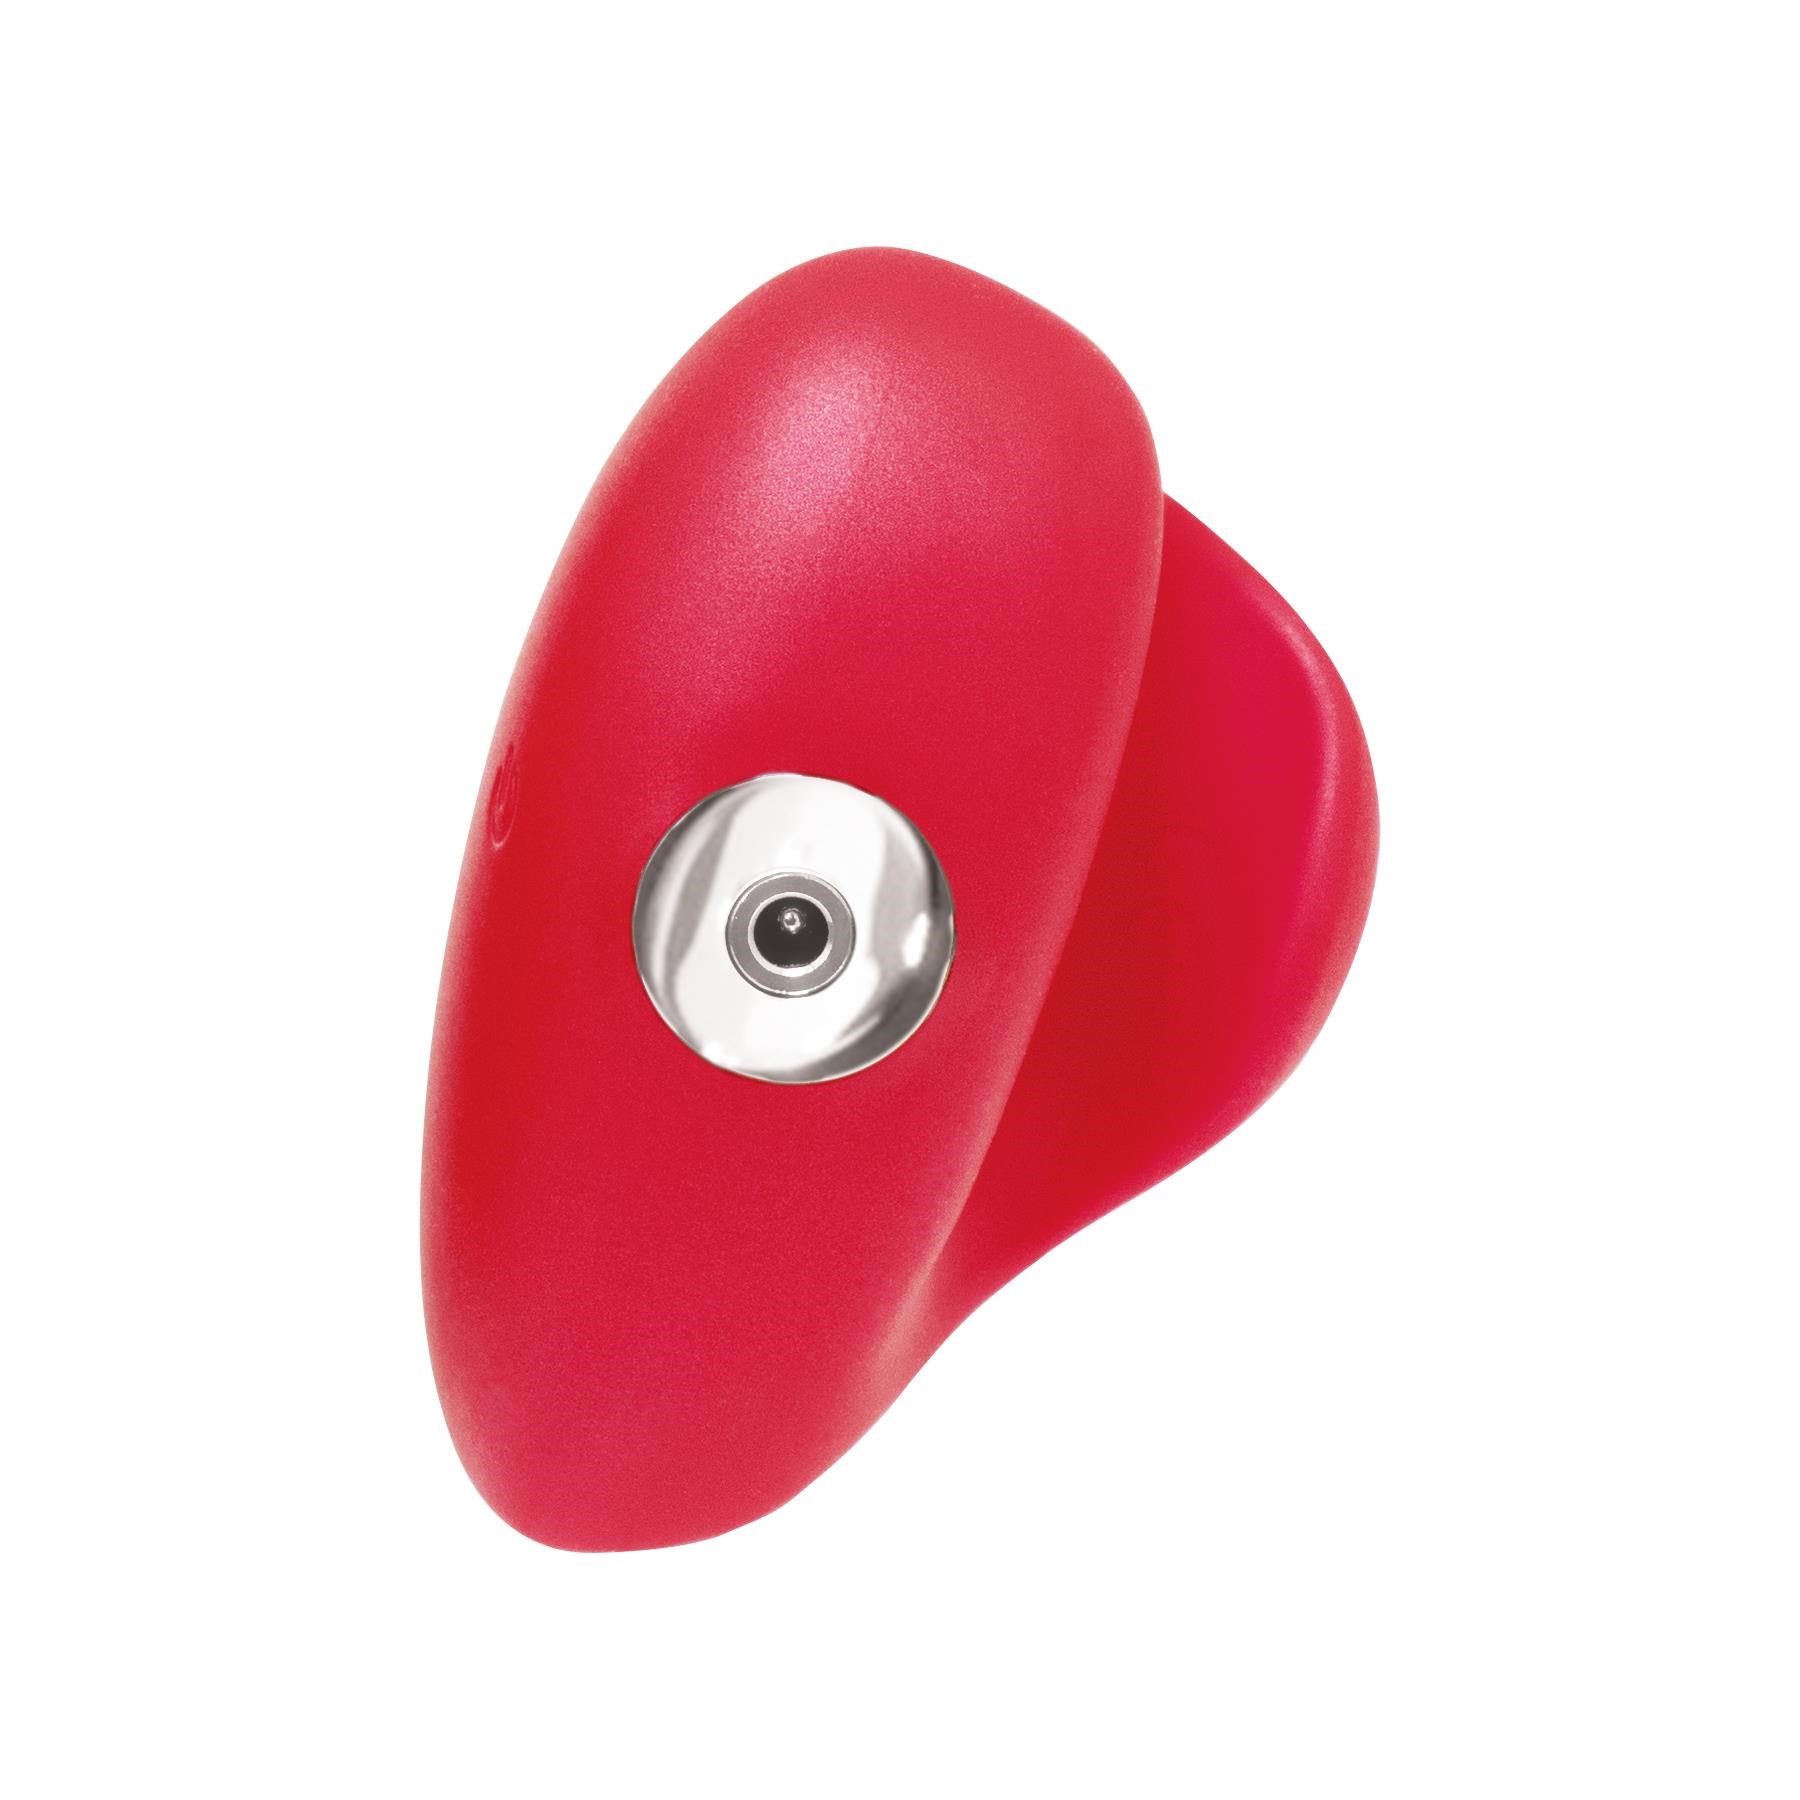 Amore Rechargeable Heart Shaped Vibrator - Product Shot